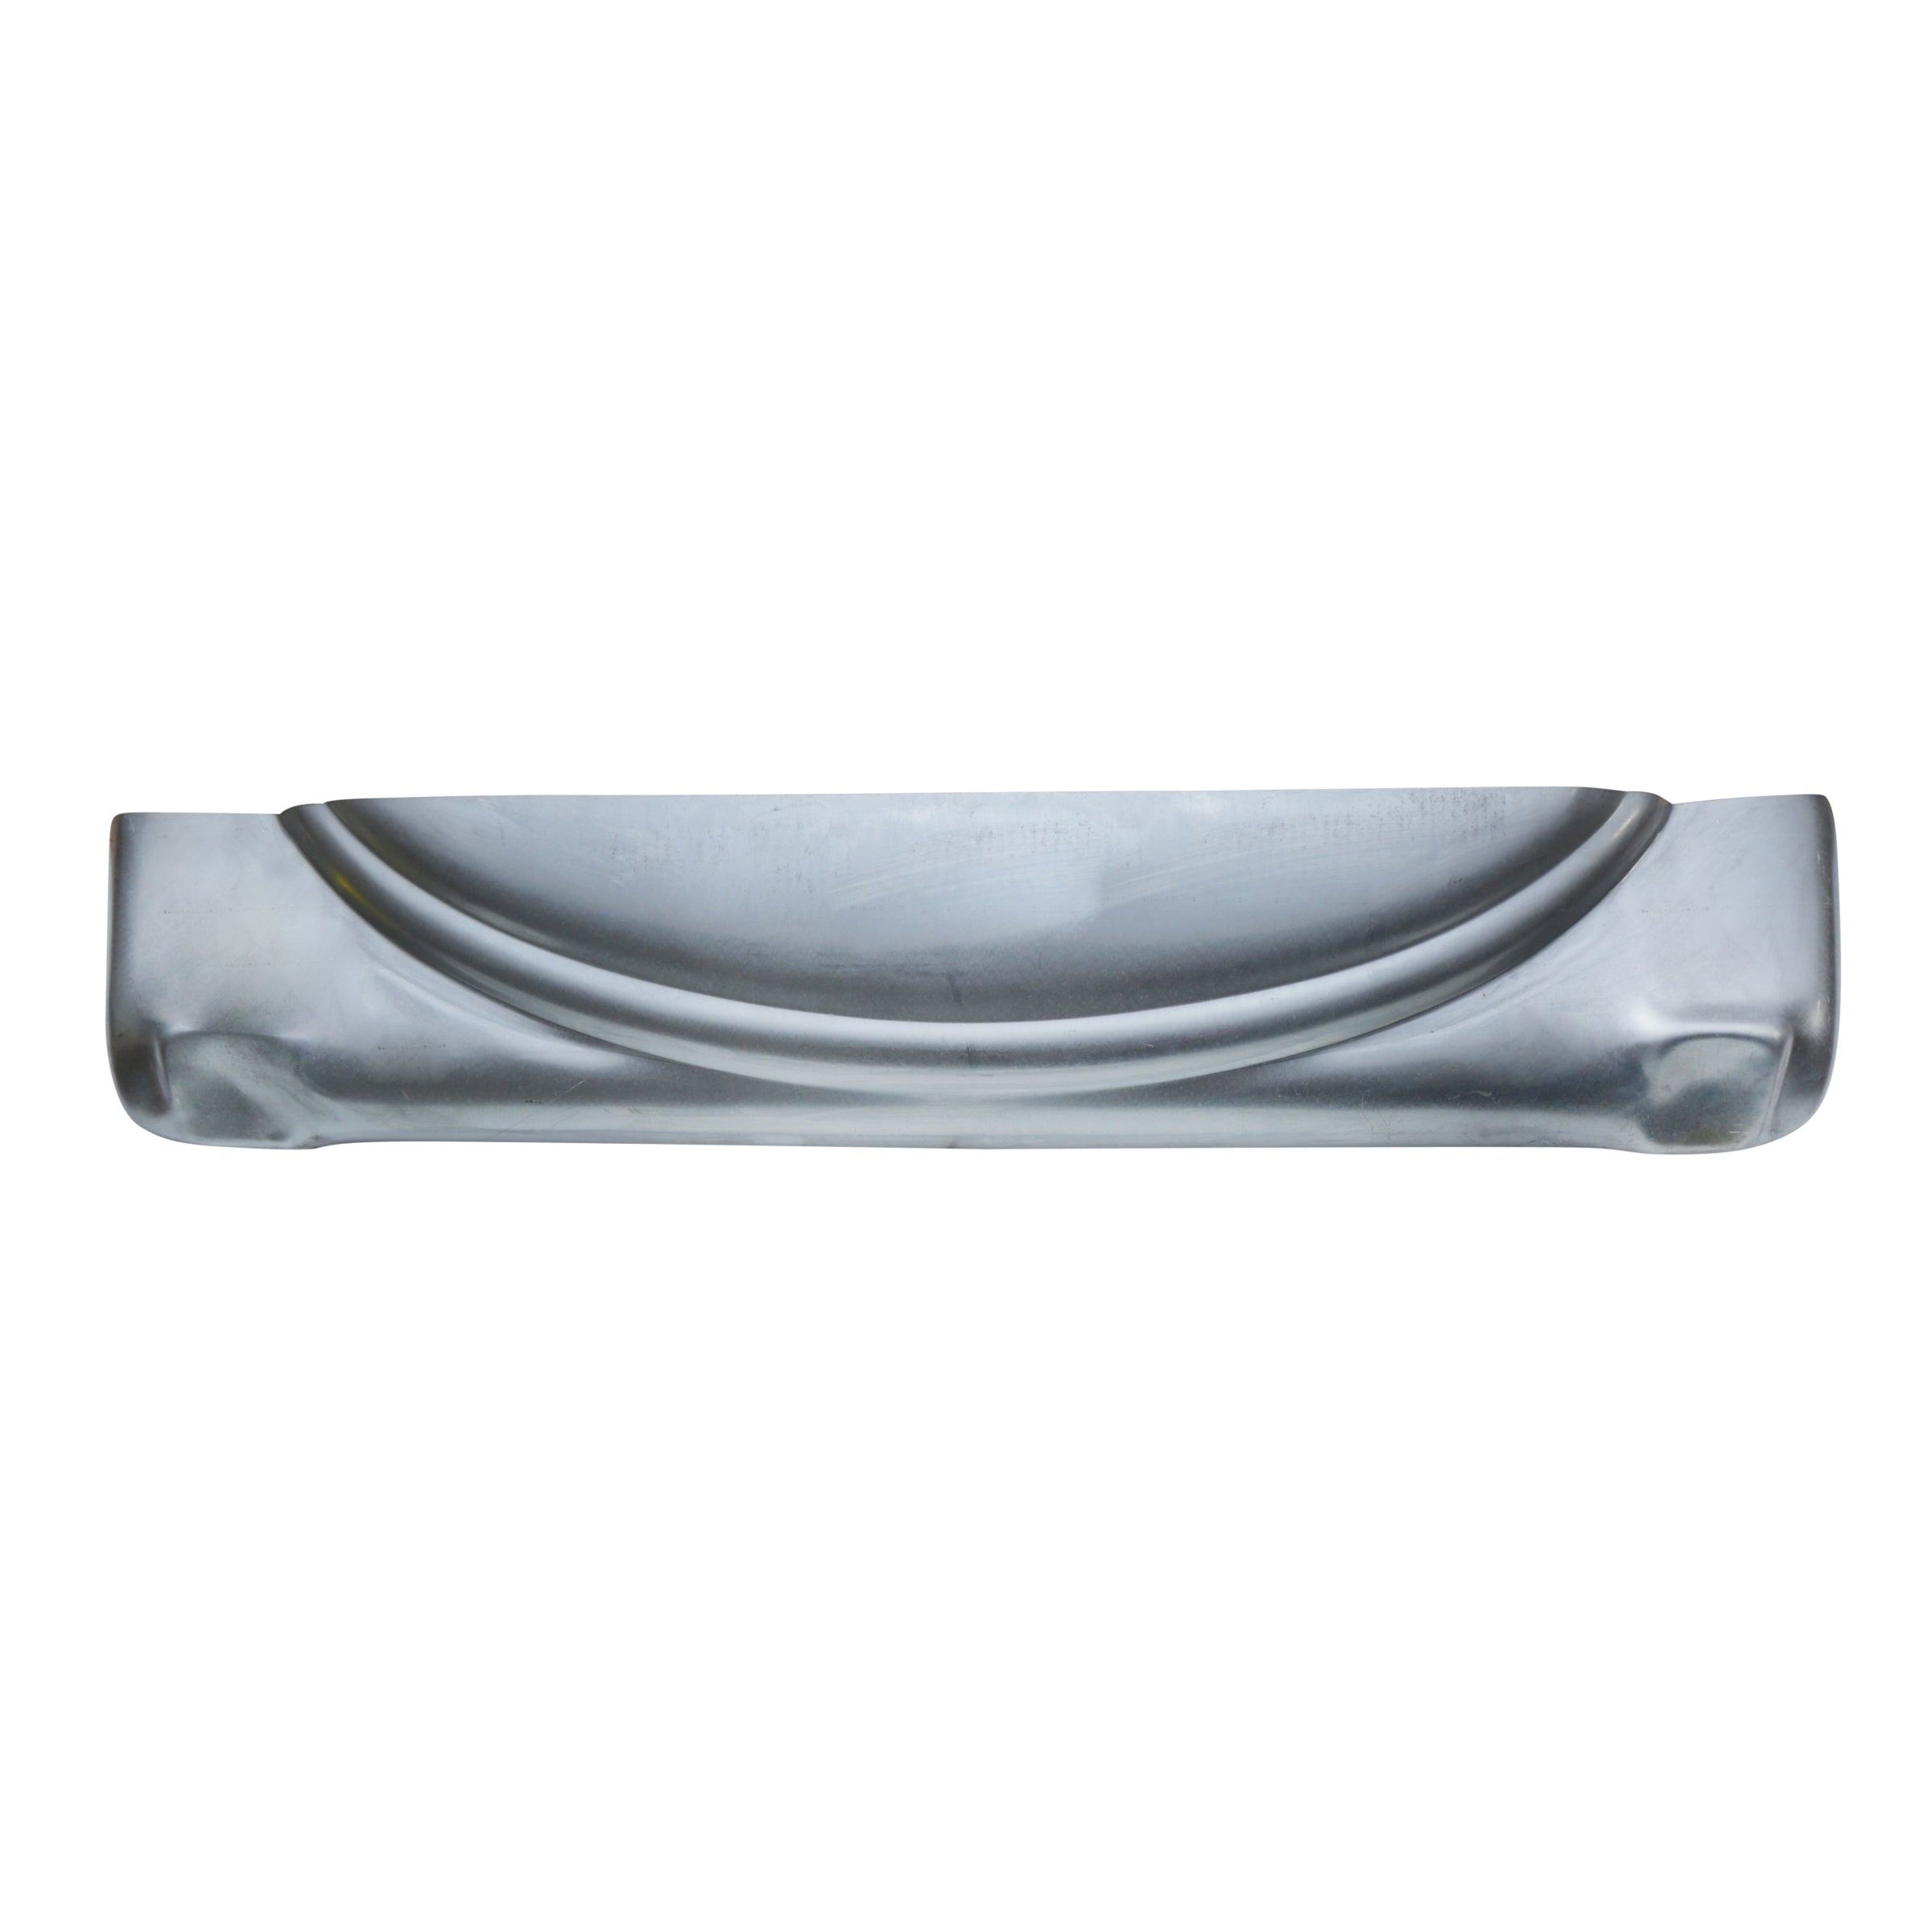 Below Trunk Lid Panel (Tail Pan) • 1935-36 Ford Coupe, Roadster, and Cabriolet